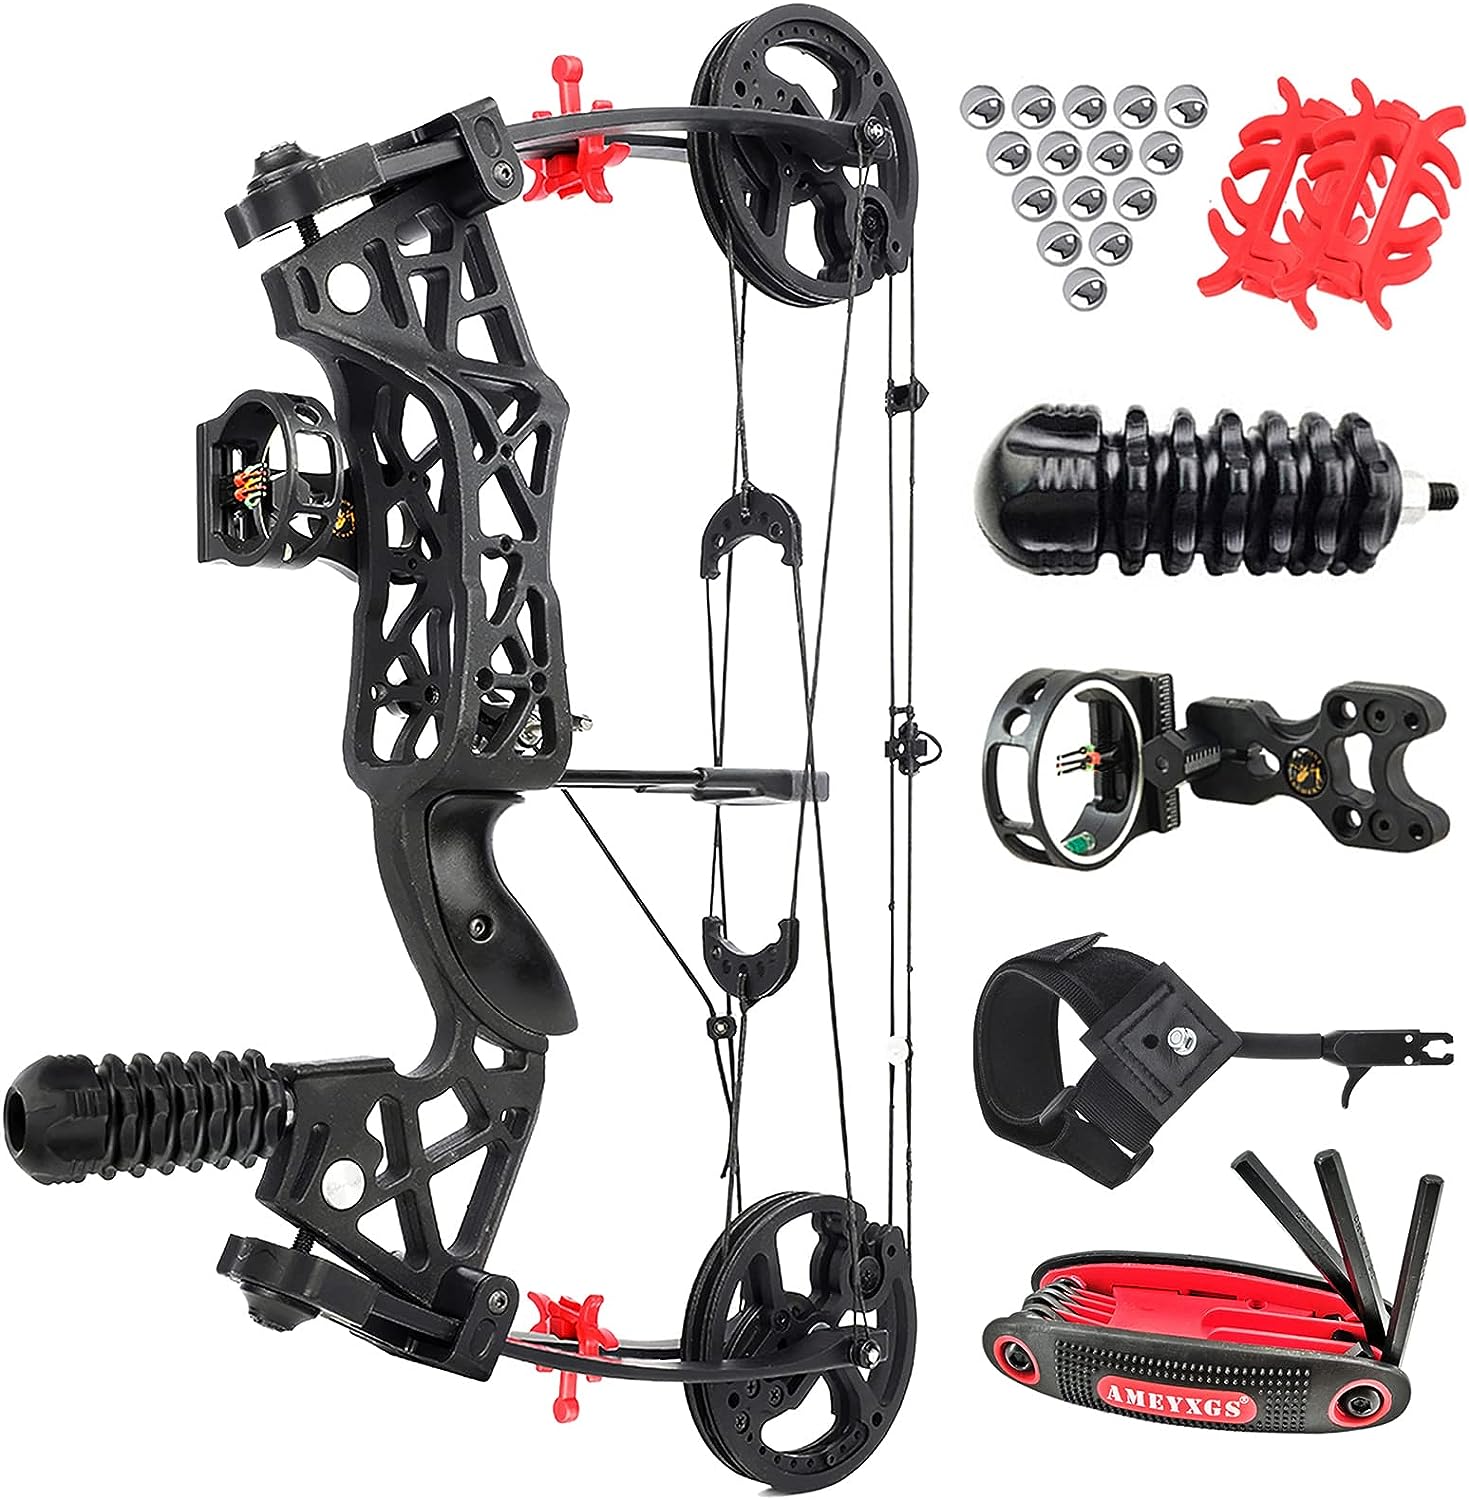 Wholesale surwolf Archery Compound Bow Kit Draw Weight 30-60Lbs